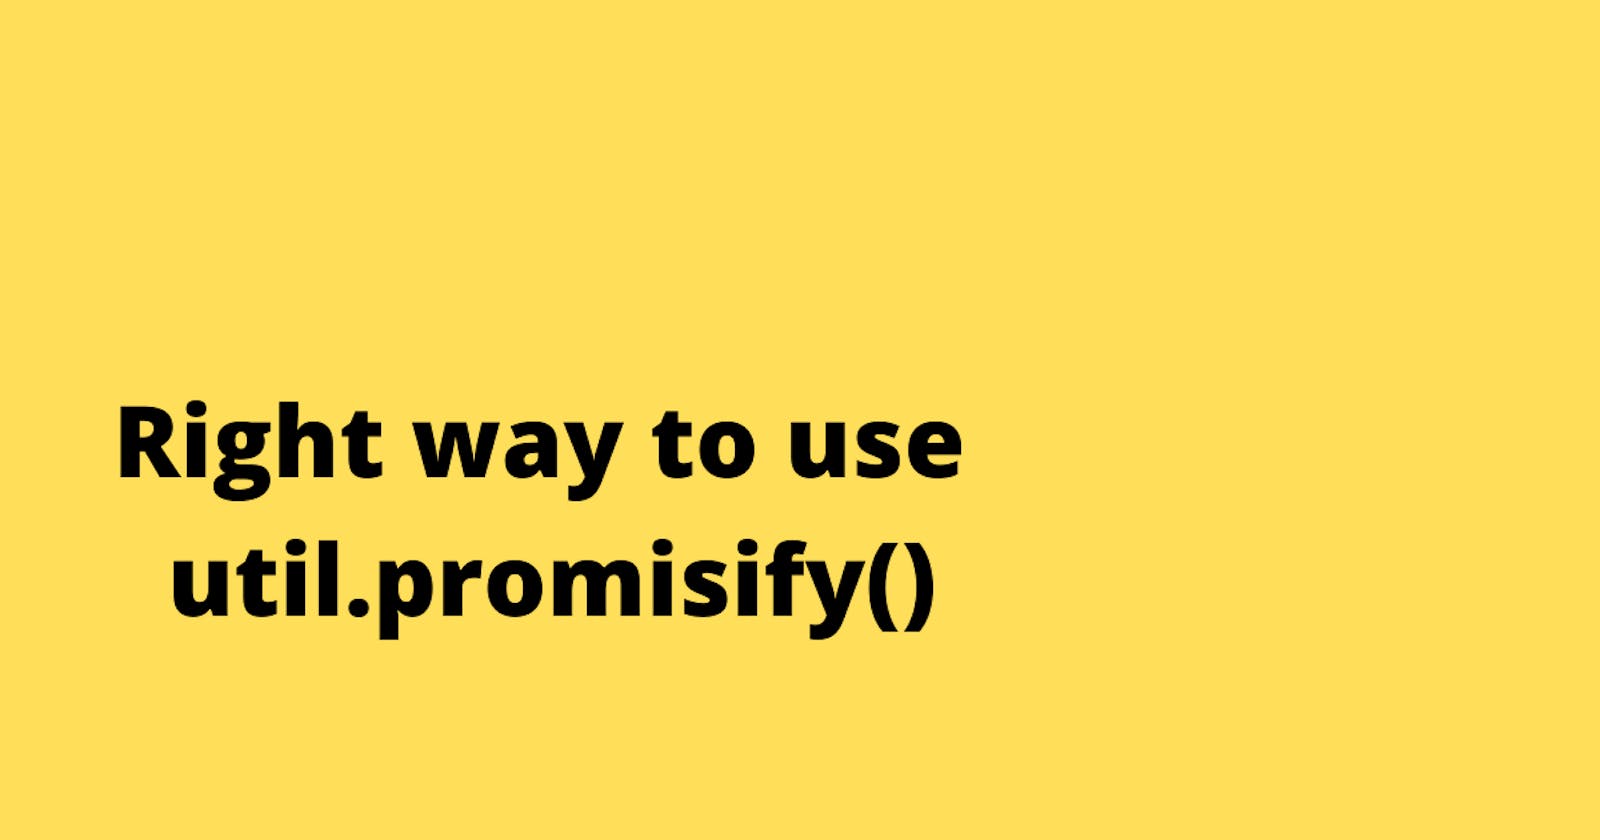 Don't use util.promisify